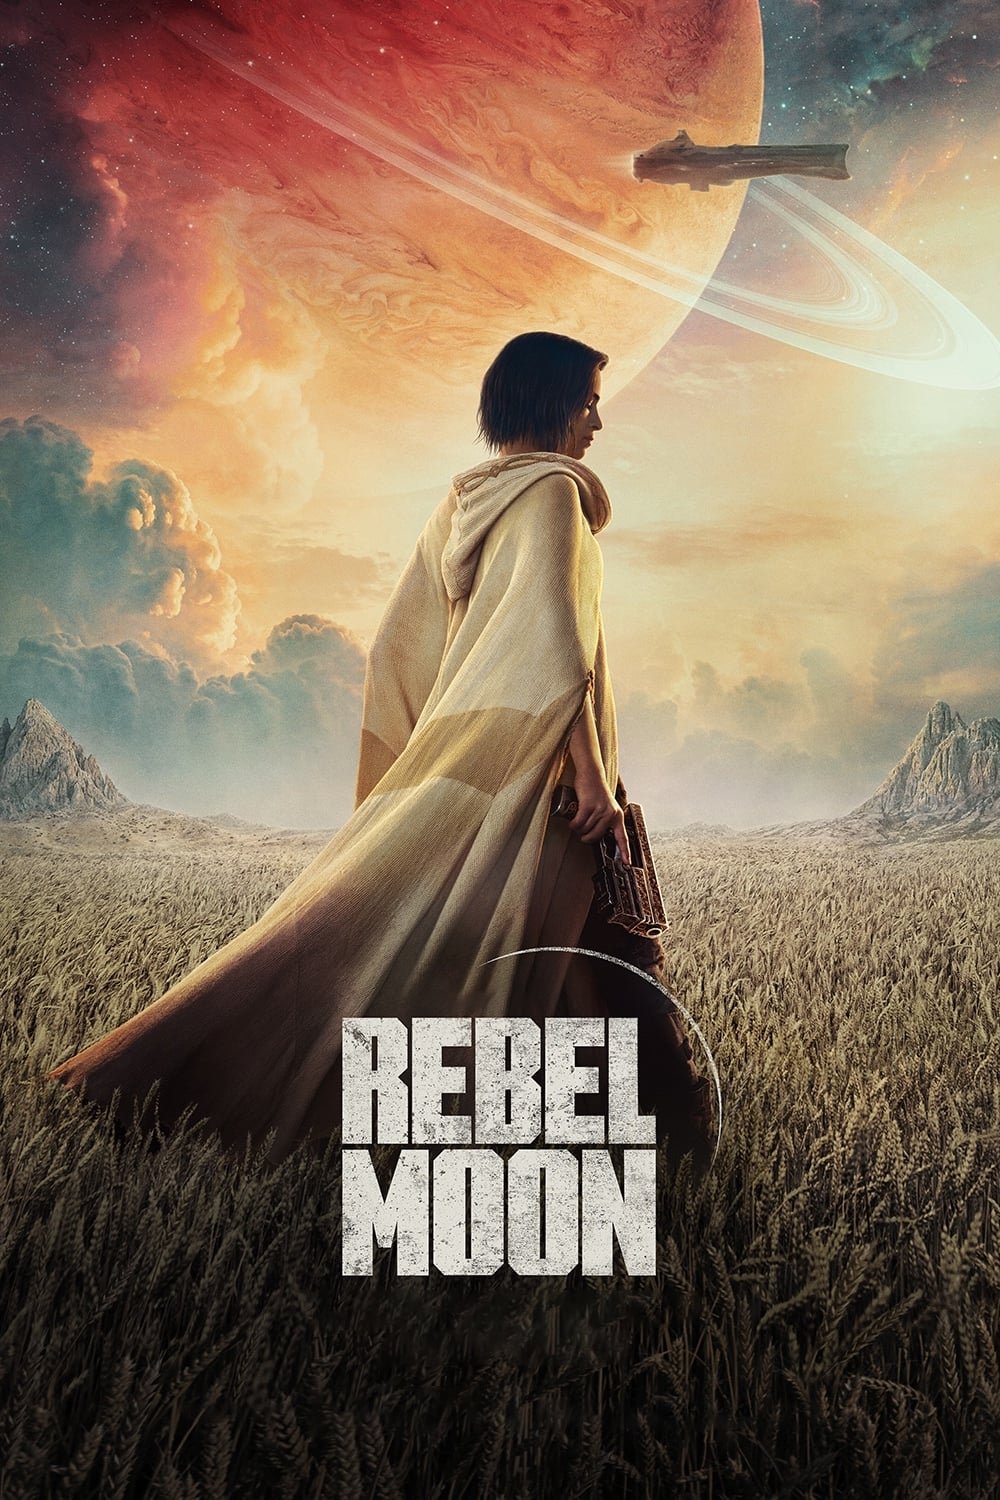 Rebel Moon release, cast plans, news, and what we've heard so far - Polygon